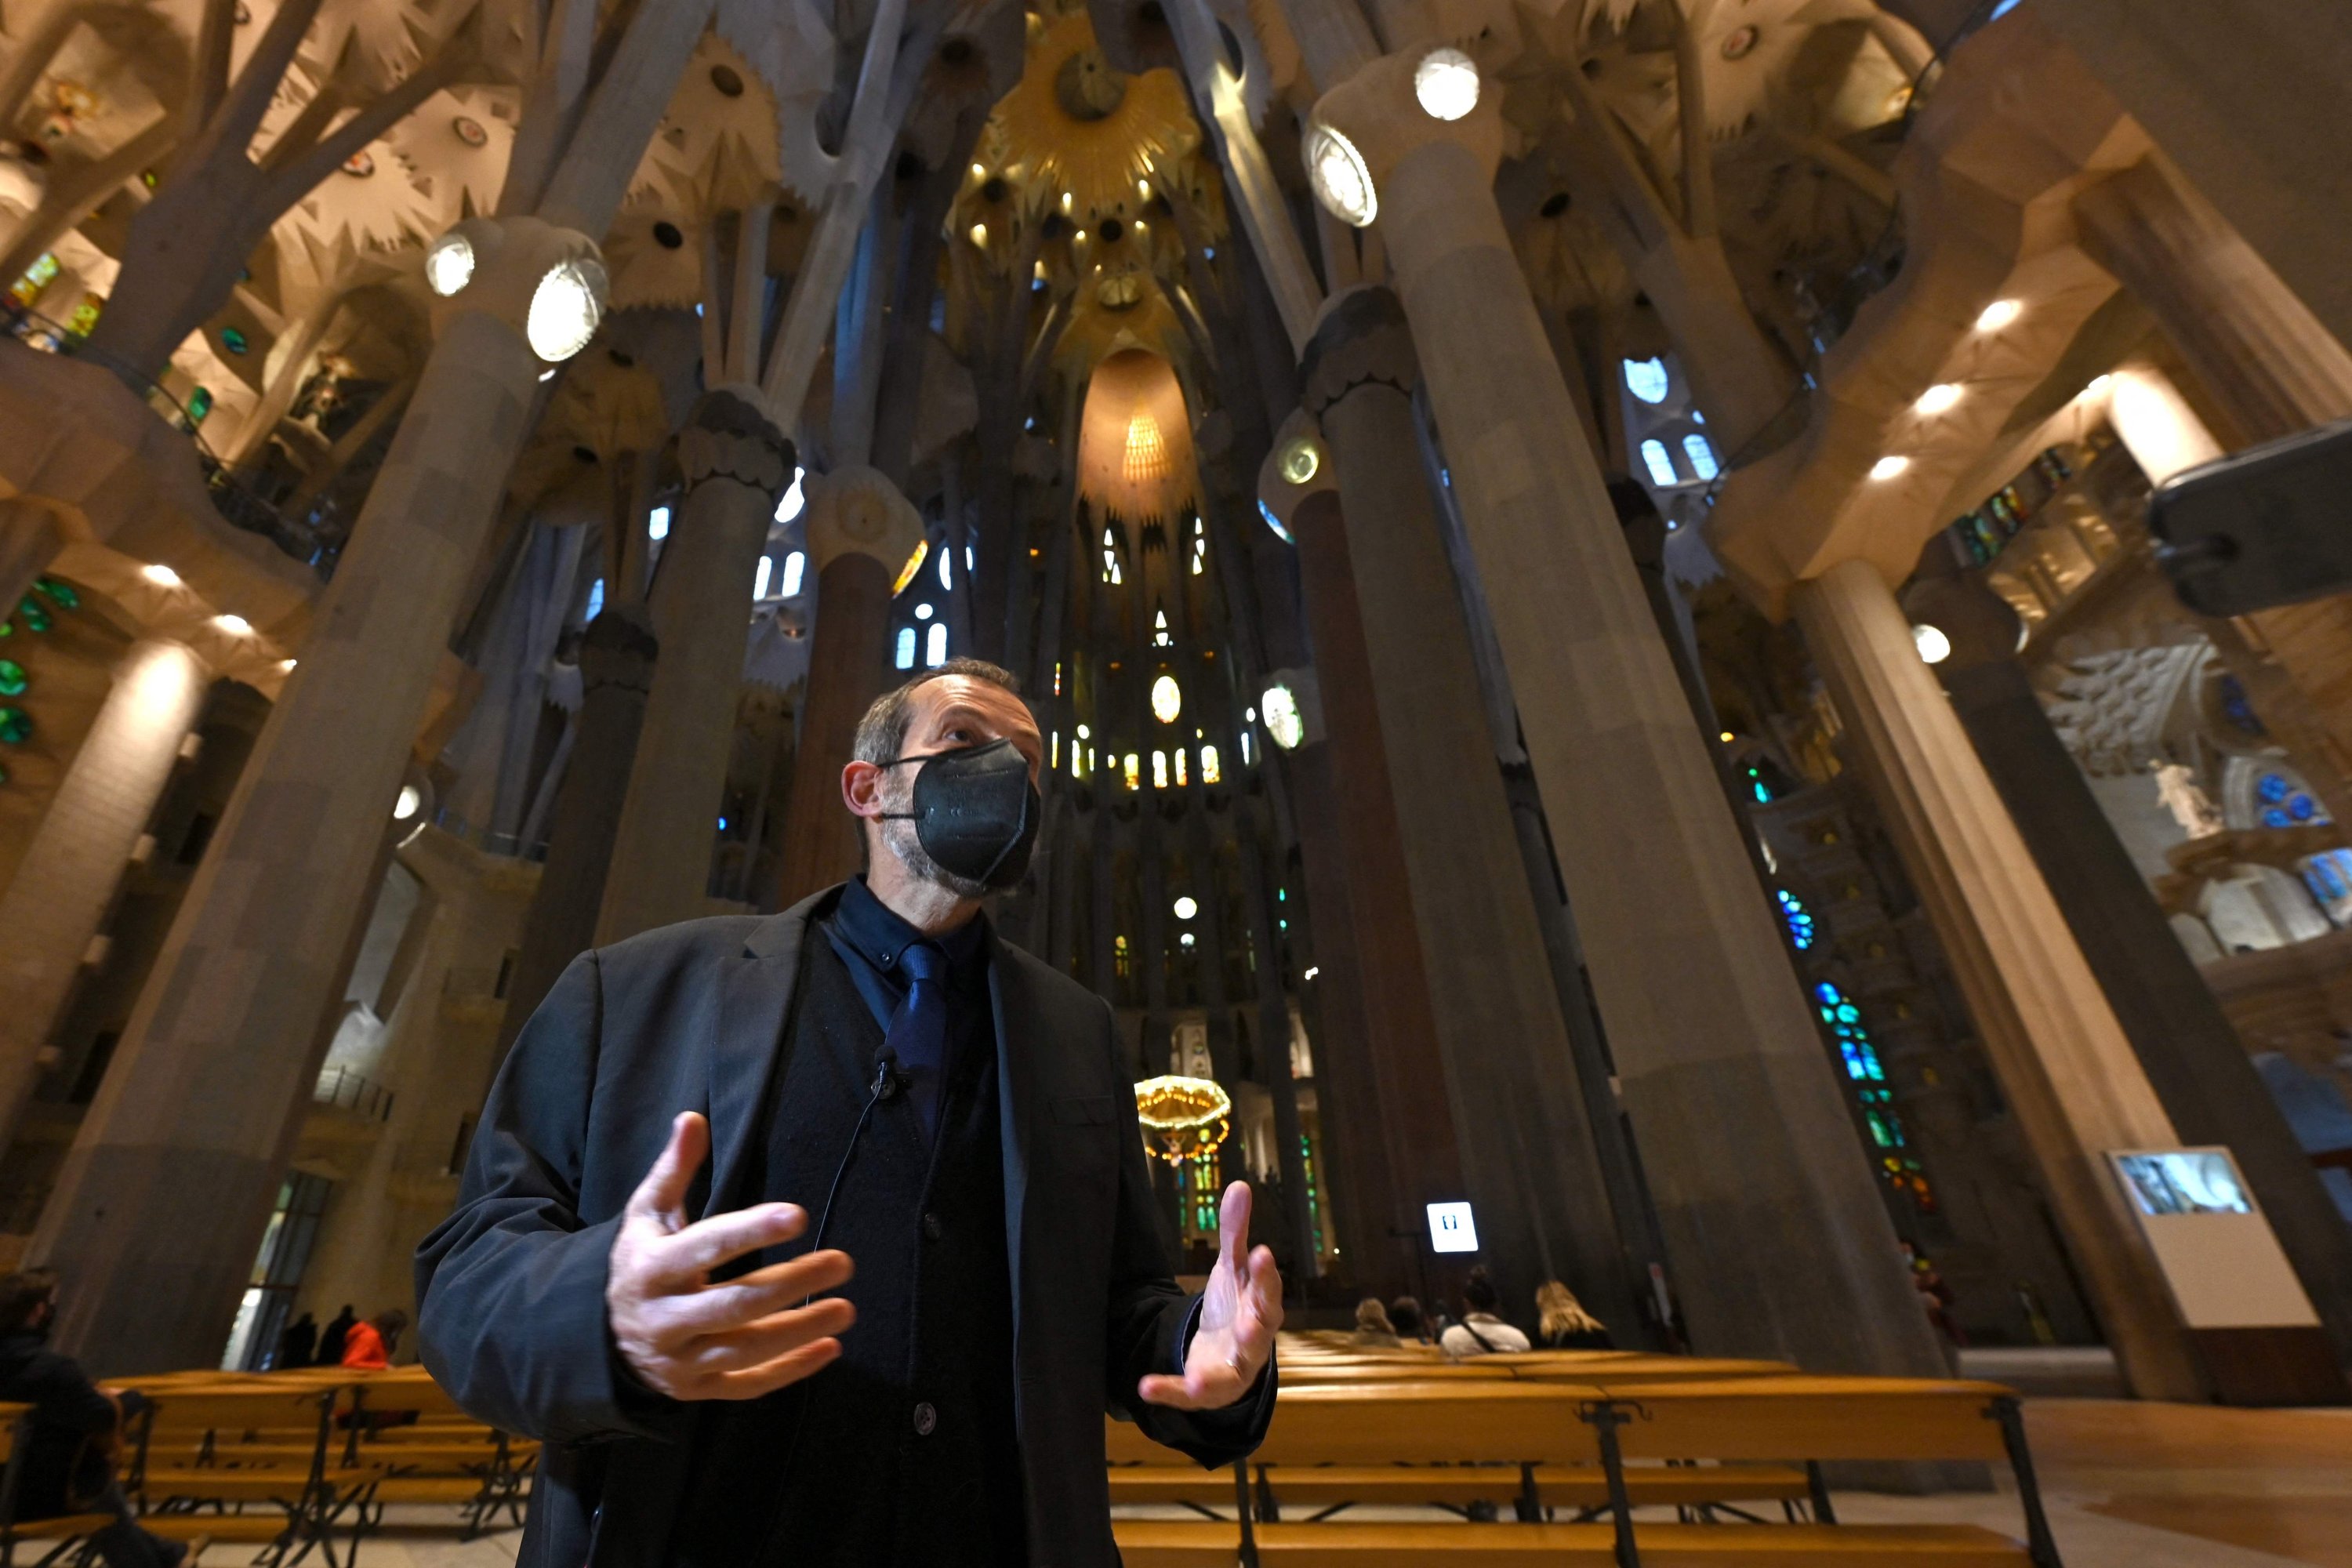 The architect director of the works of the Sagrada Familia basilica, Jordi Fauli, poses inside the catholic temple during an interview with AFP in Barcelona on Dec. 1, 2021. (AFP Photo)